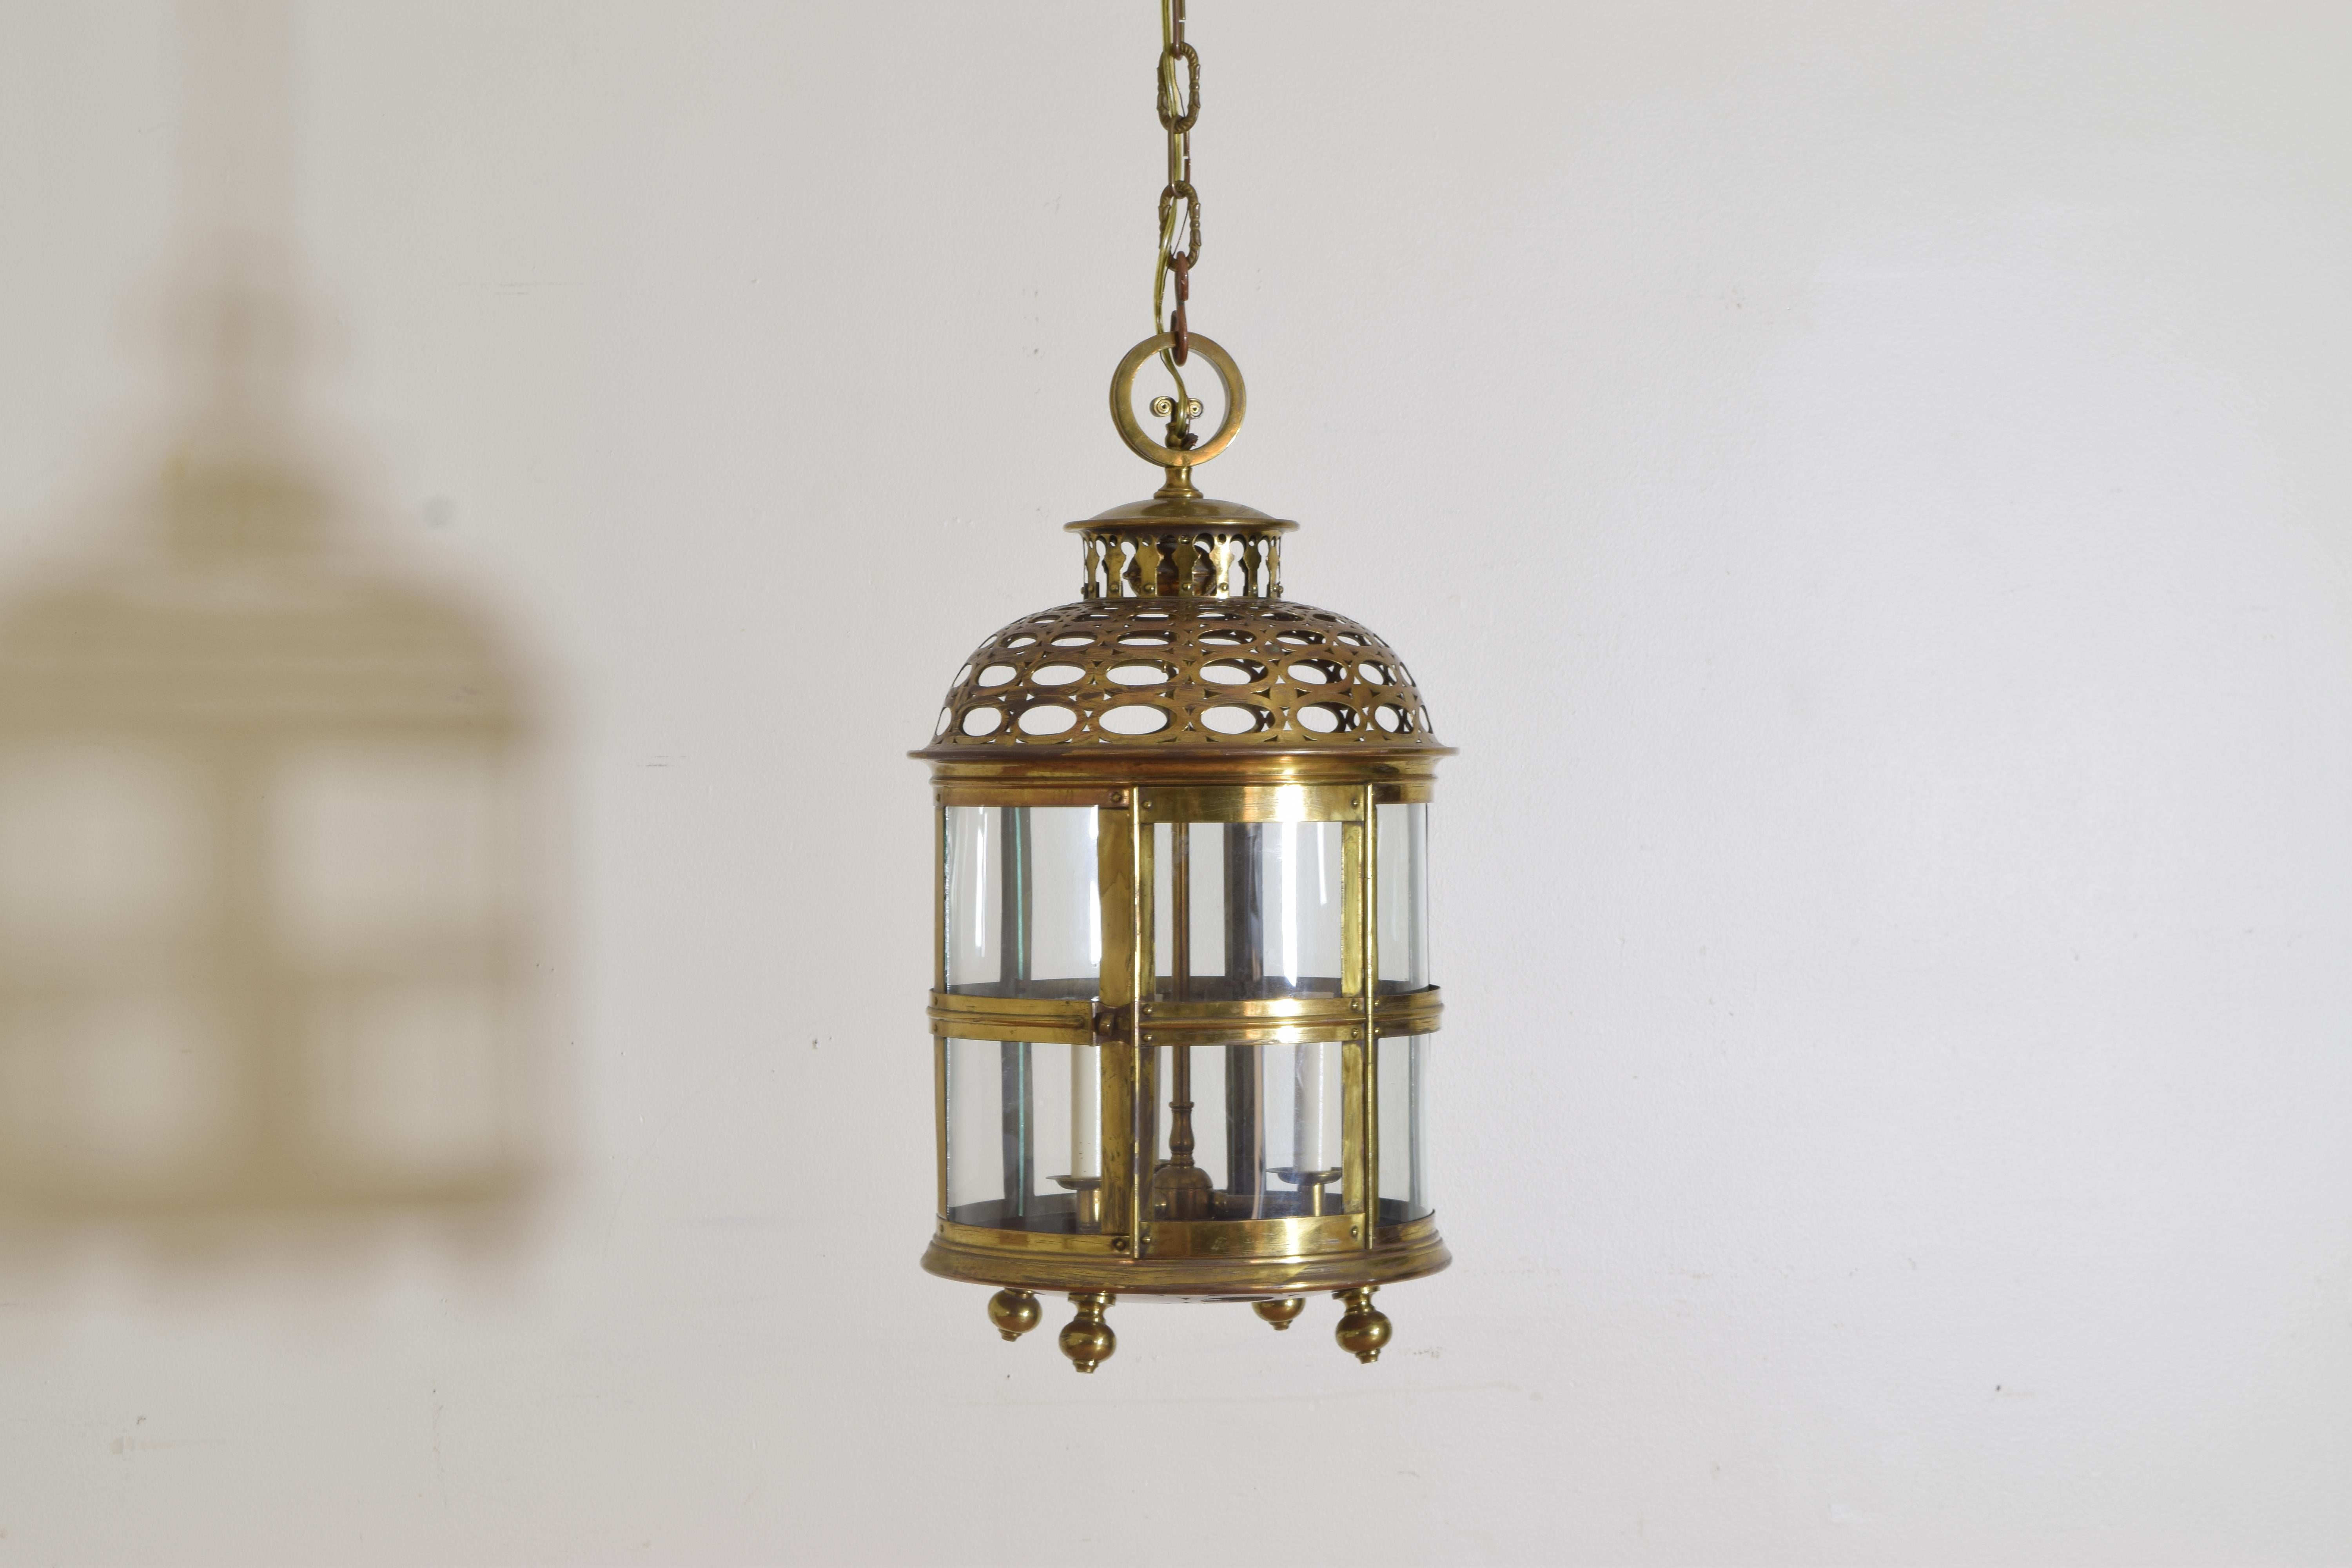 elongated dome with lantern